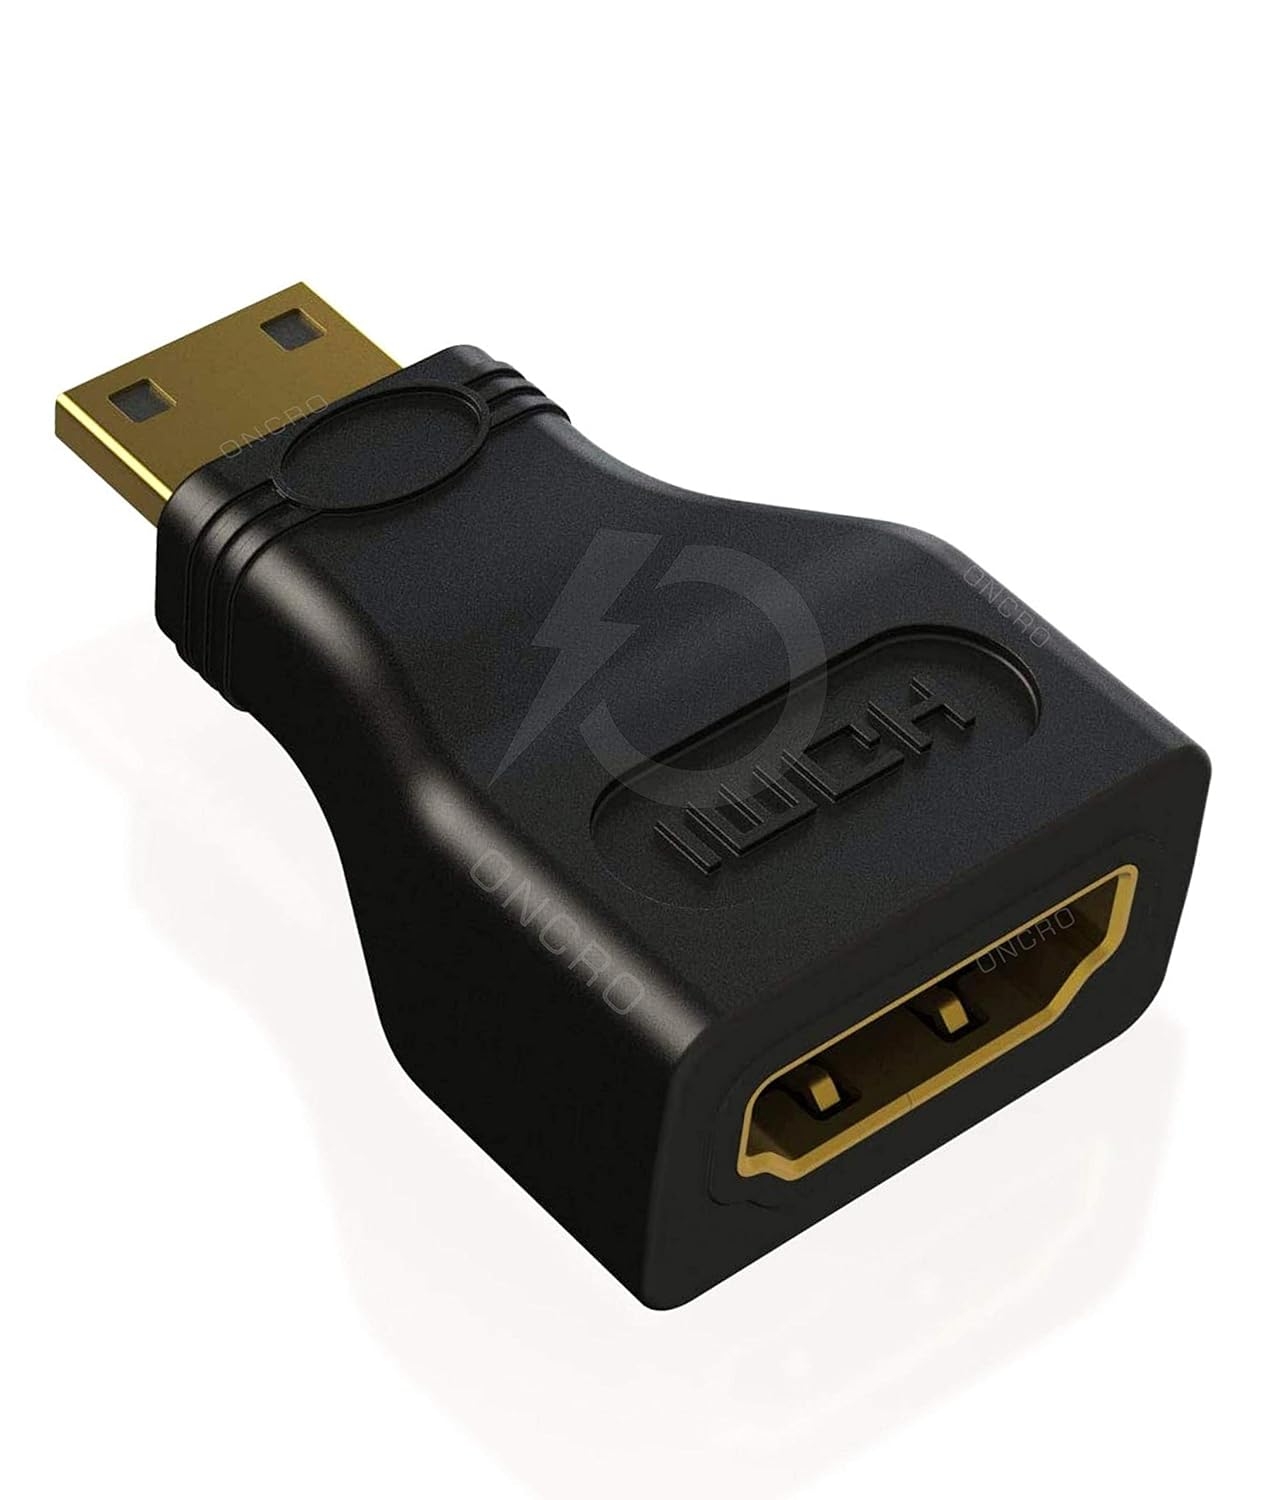 ONCRO HDMI Female to Mini HDMI Male Connector Converter for Cameras, Cam Recorders, Tablet, Gaming, Graphic Card Console